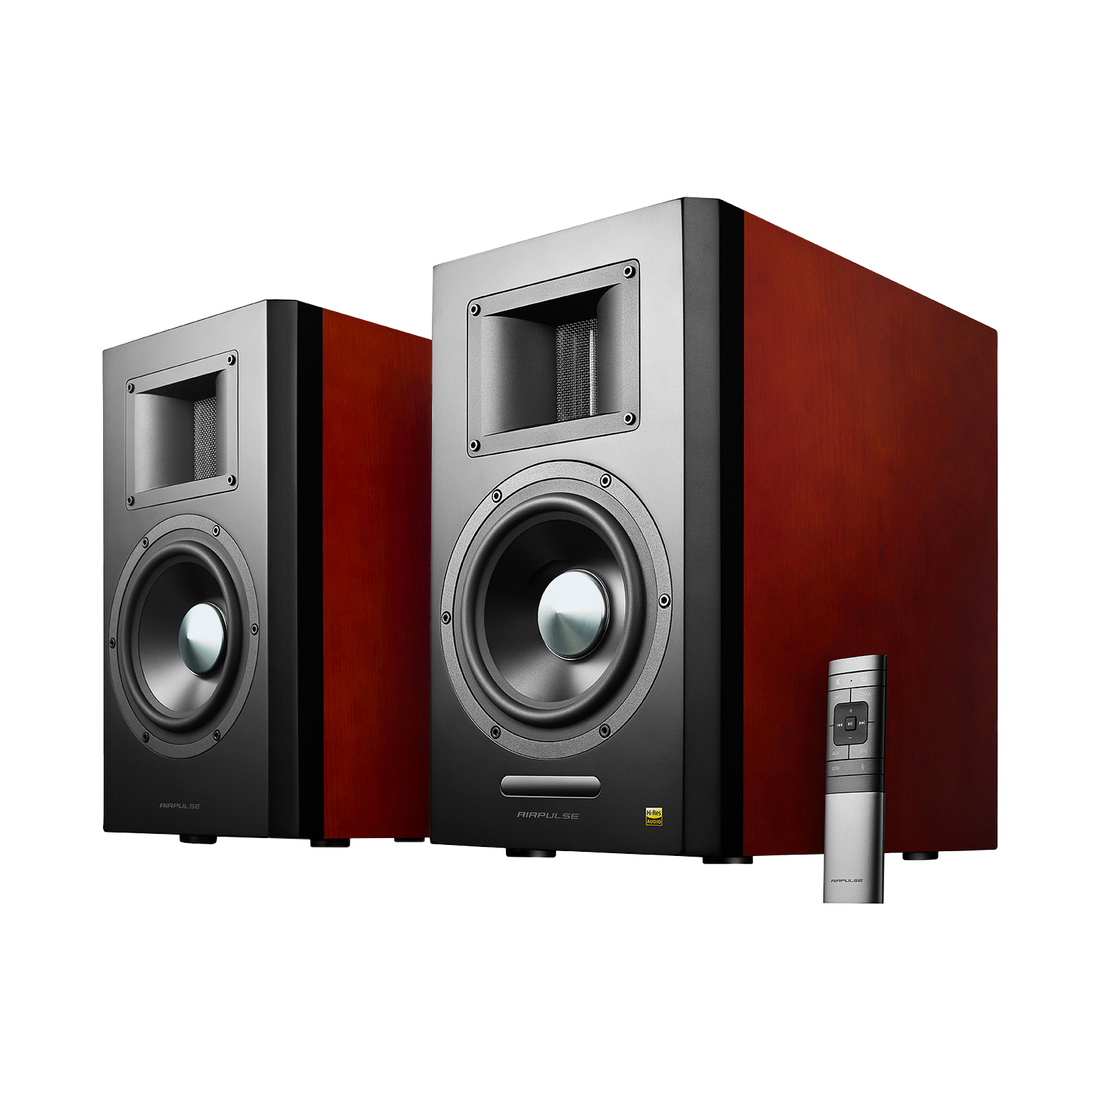 Airpulse A300 Hi-Res Wireless Plug-in Speaker System